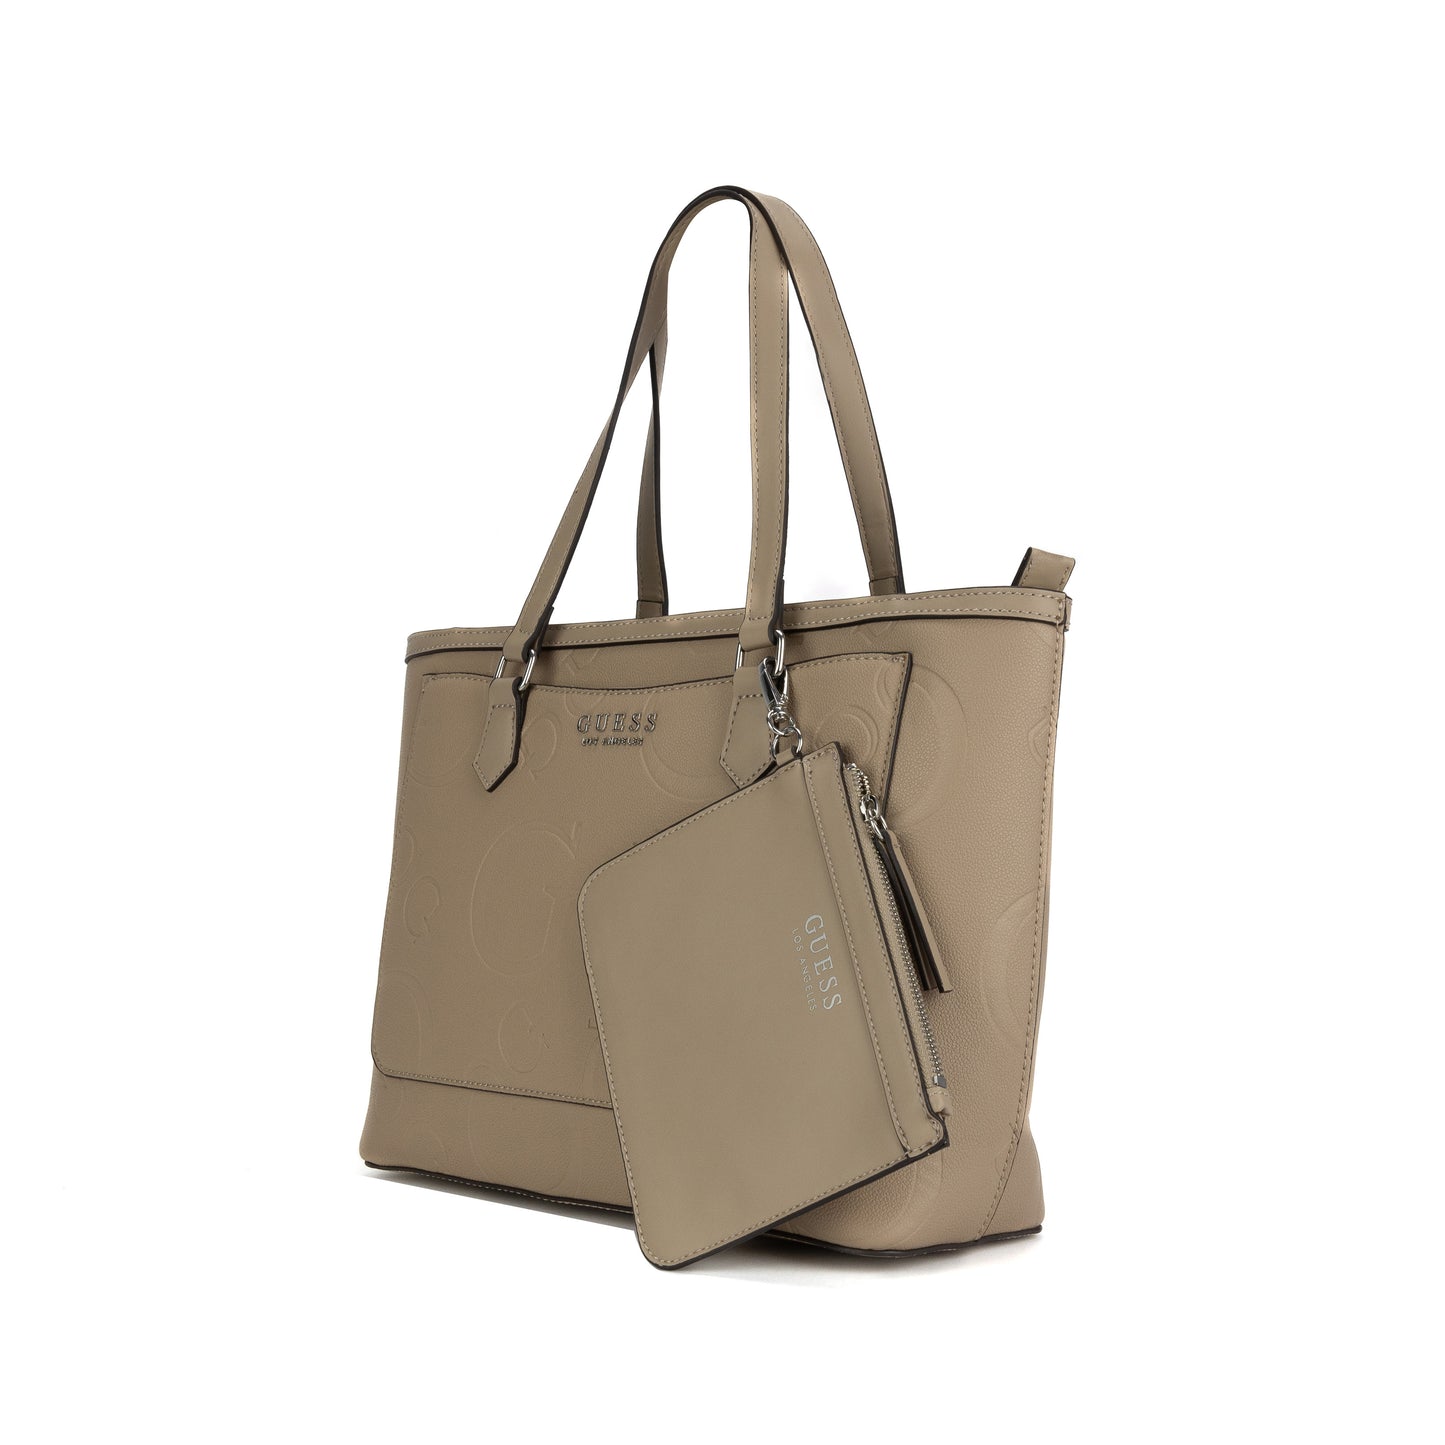 Guess Women's Medford Tote Bag- Taupe